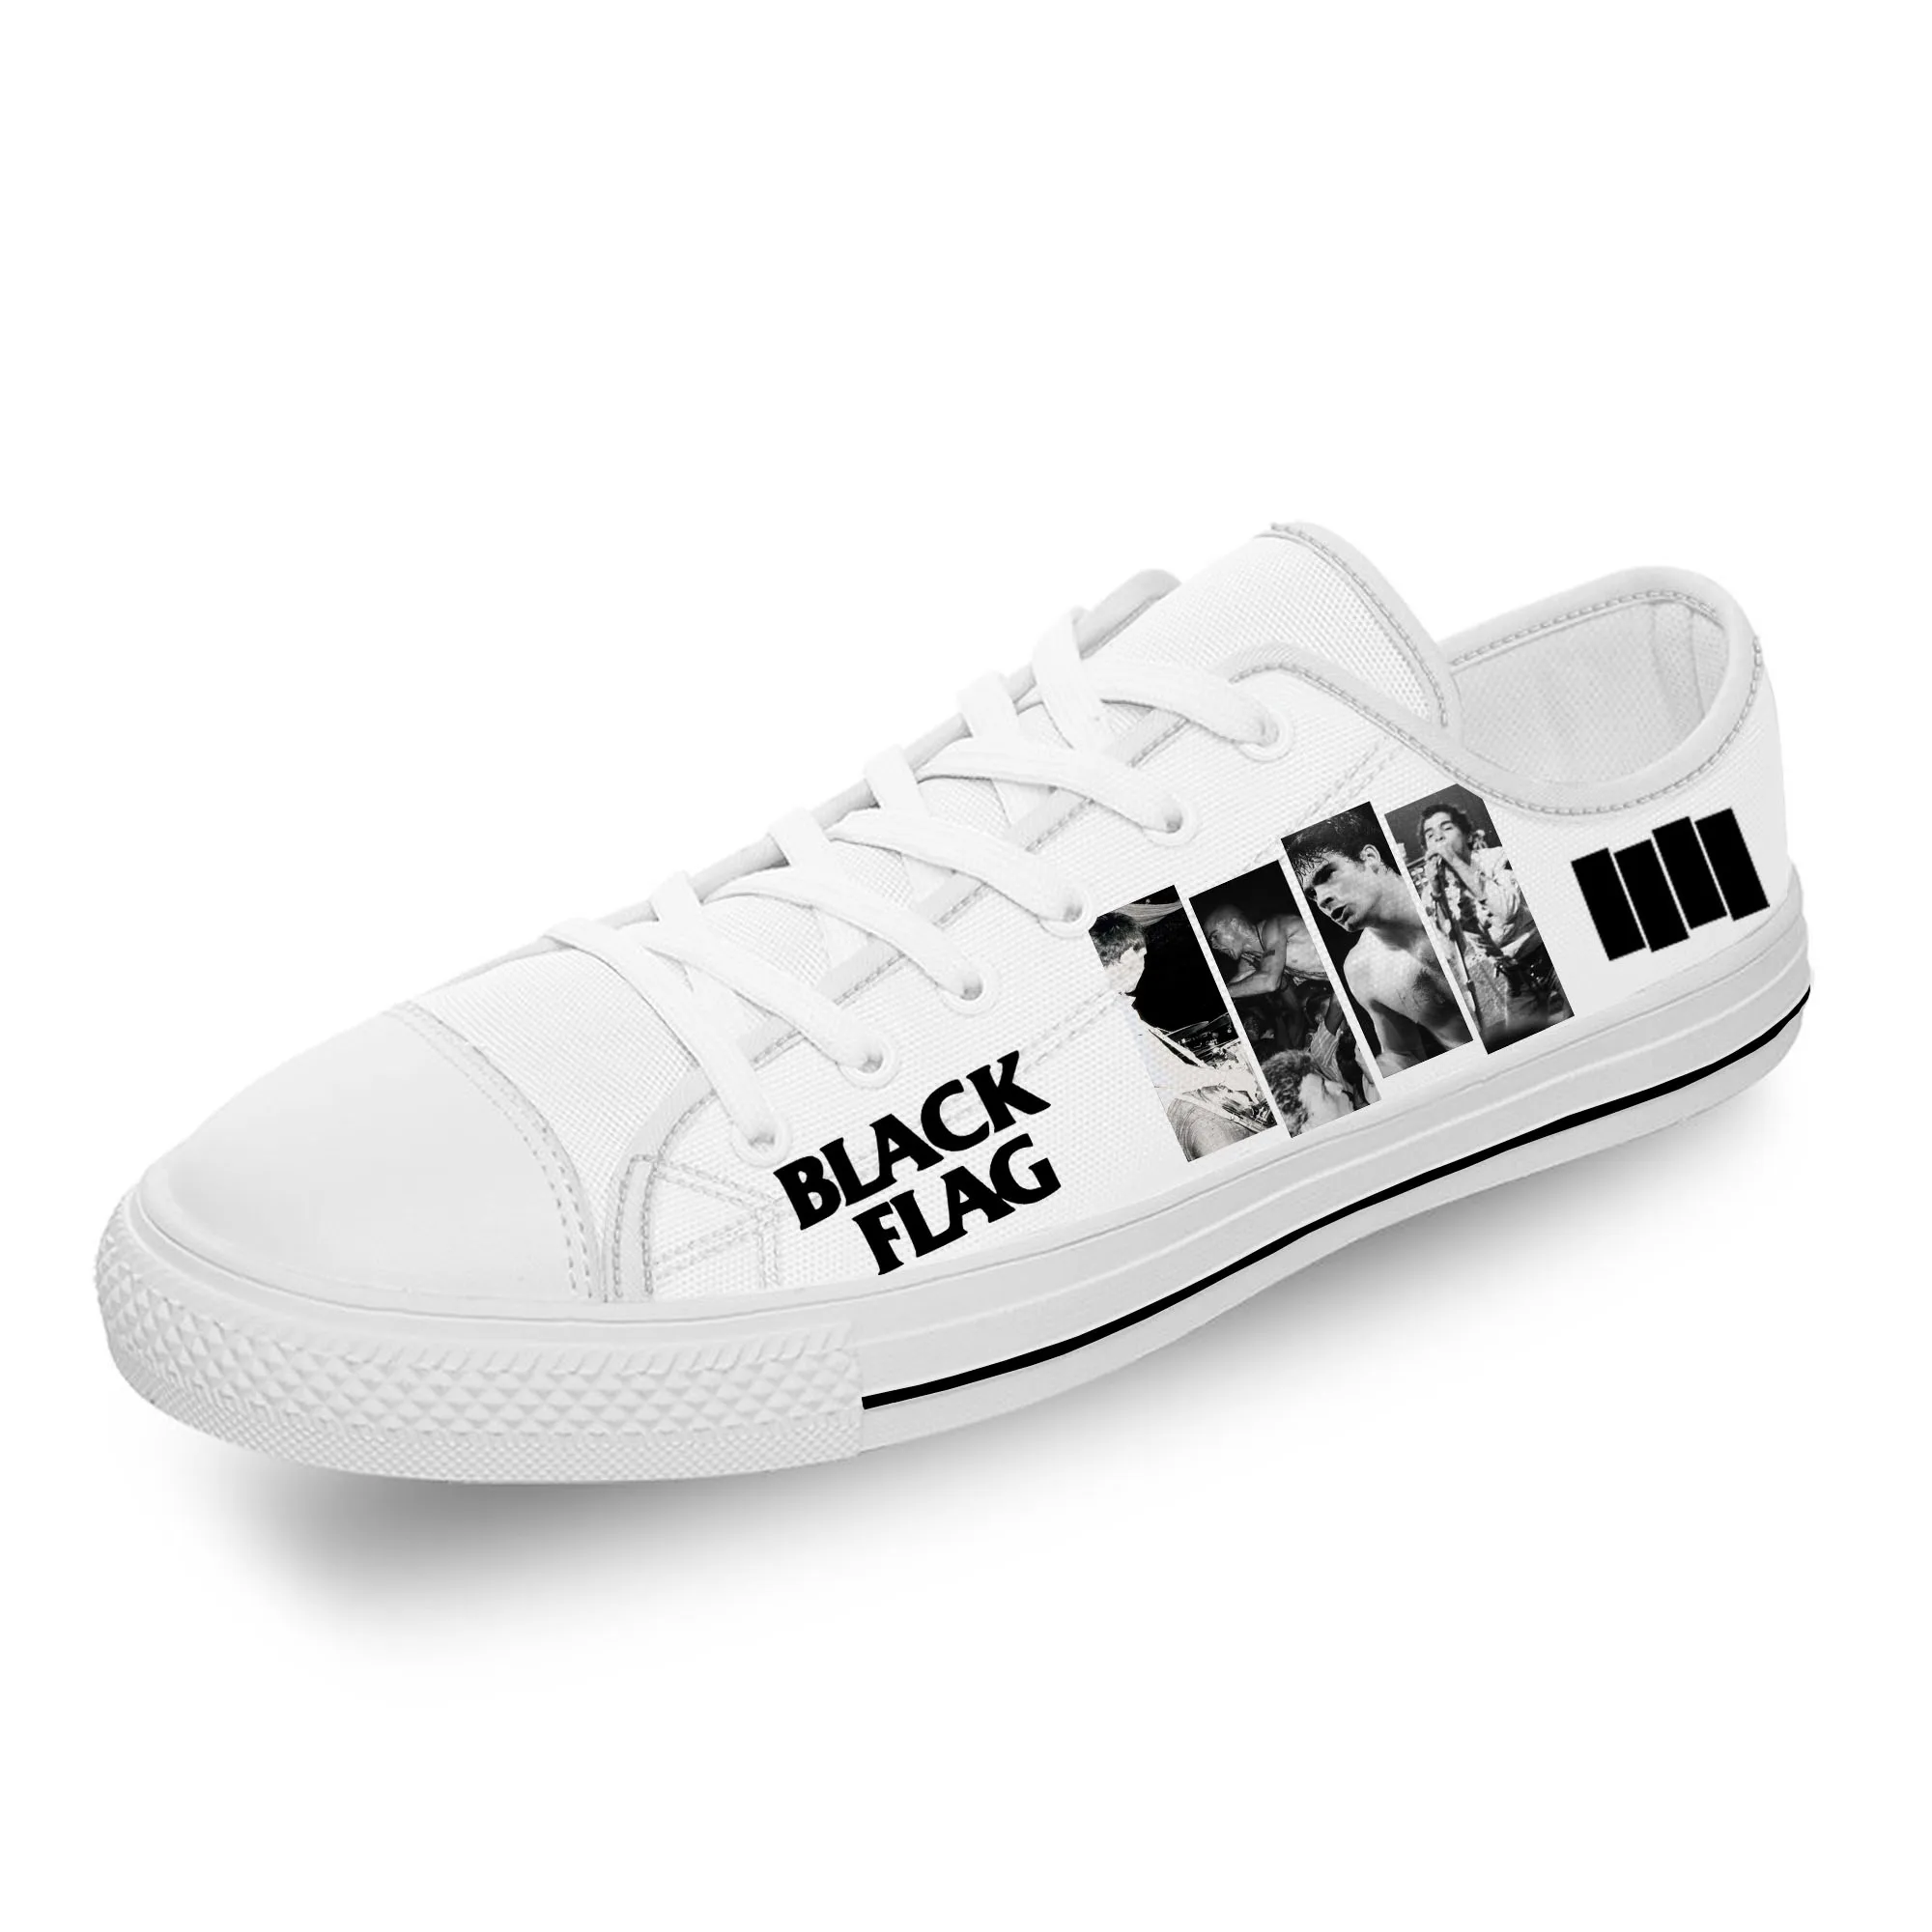 black flag rock band low top sneakers mens womens teenager casual shoes canvas running shoes 3d print designer lightweight shoe BLACK FLAG Rock Band Low Top Sneakers Mens Womens Teenager Casual Shoes Canvas Running Shoes 3D Print Designer Lightweight shoe